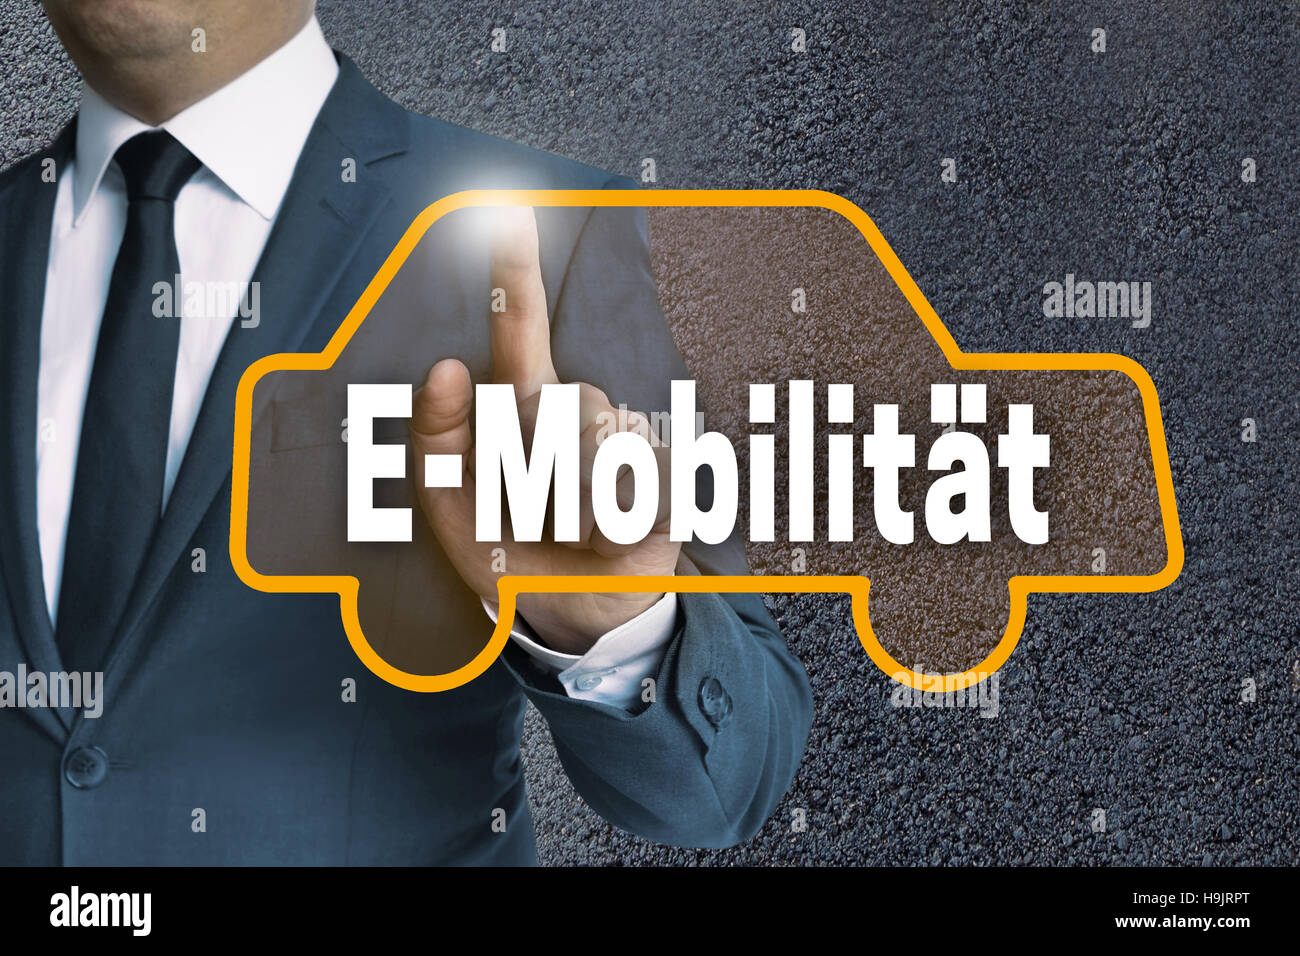 E-Mobilitaet (in german E-mobility) touchscreen is shown by businessman. Stock Photo